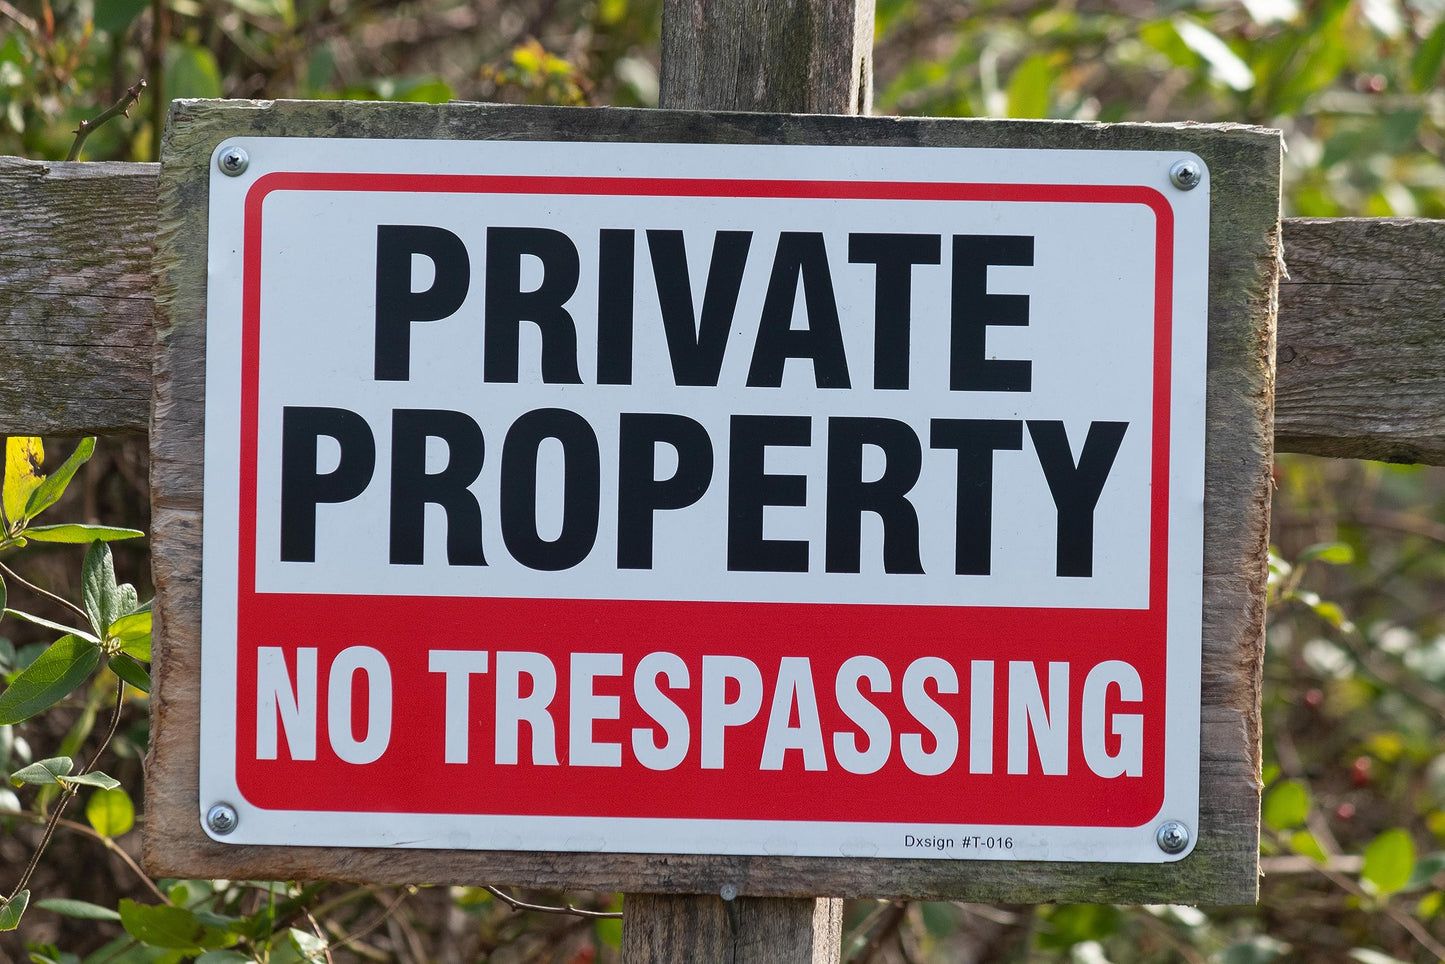 Premium UV Printed Aluminum Rust-Proof Metal No Trespassing Signs For Private Property, Keep Out Sign with Posted Signs Fade Resistant Last For Years Made in USA. by AV Grafx (No Trespassing)